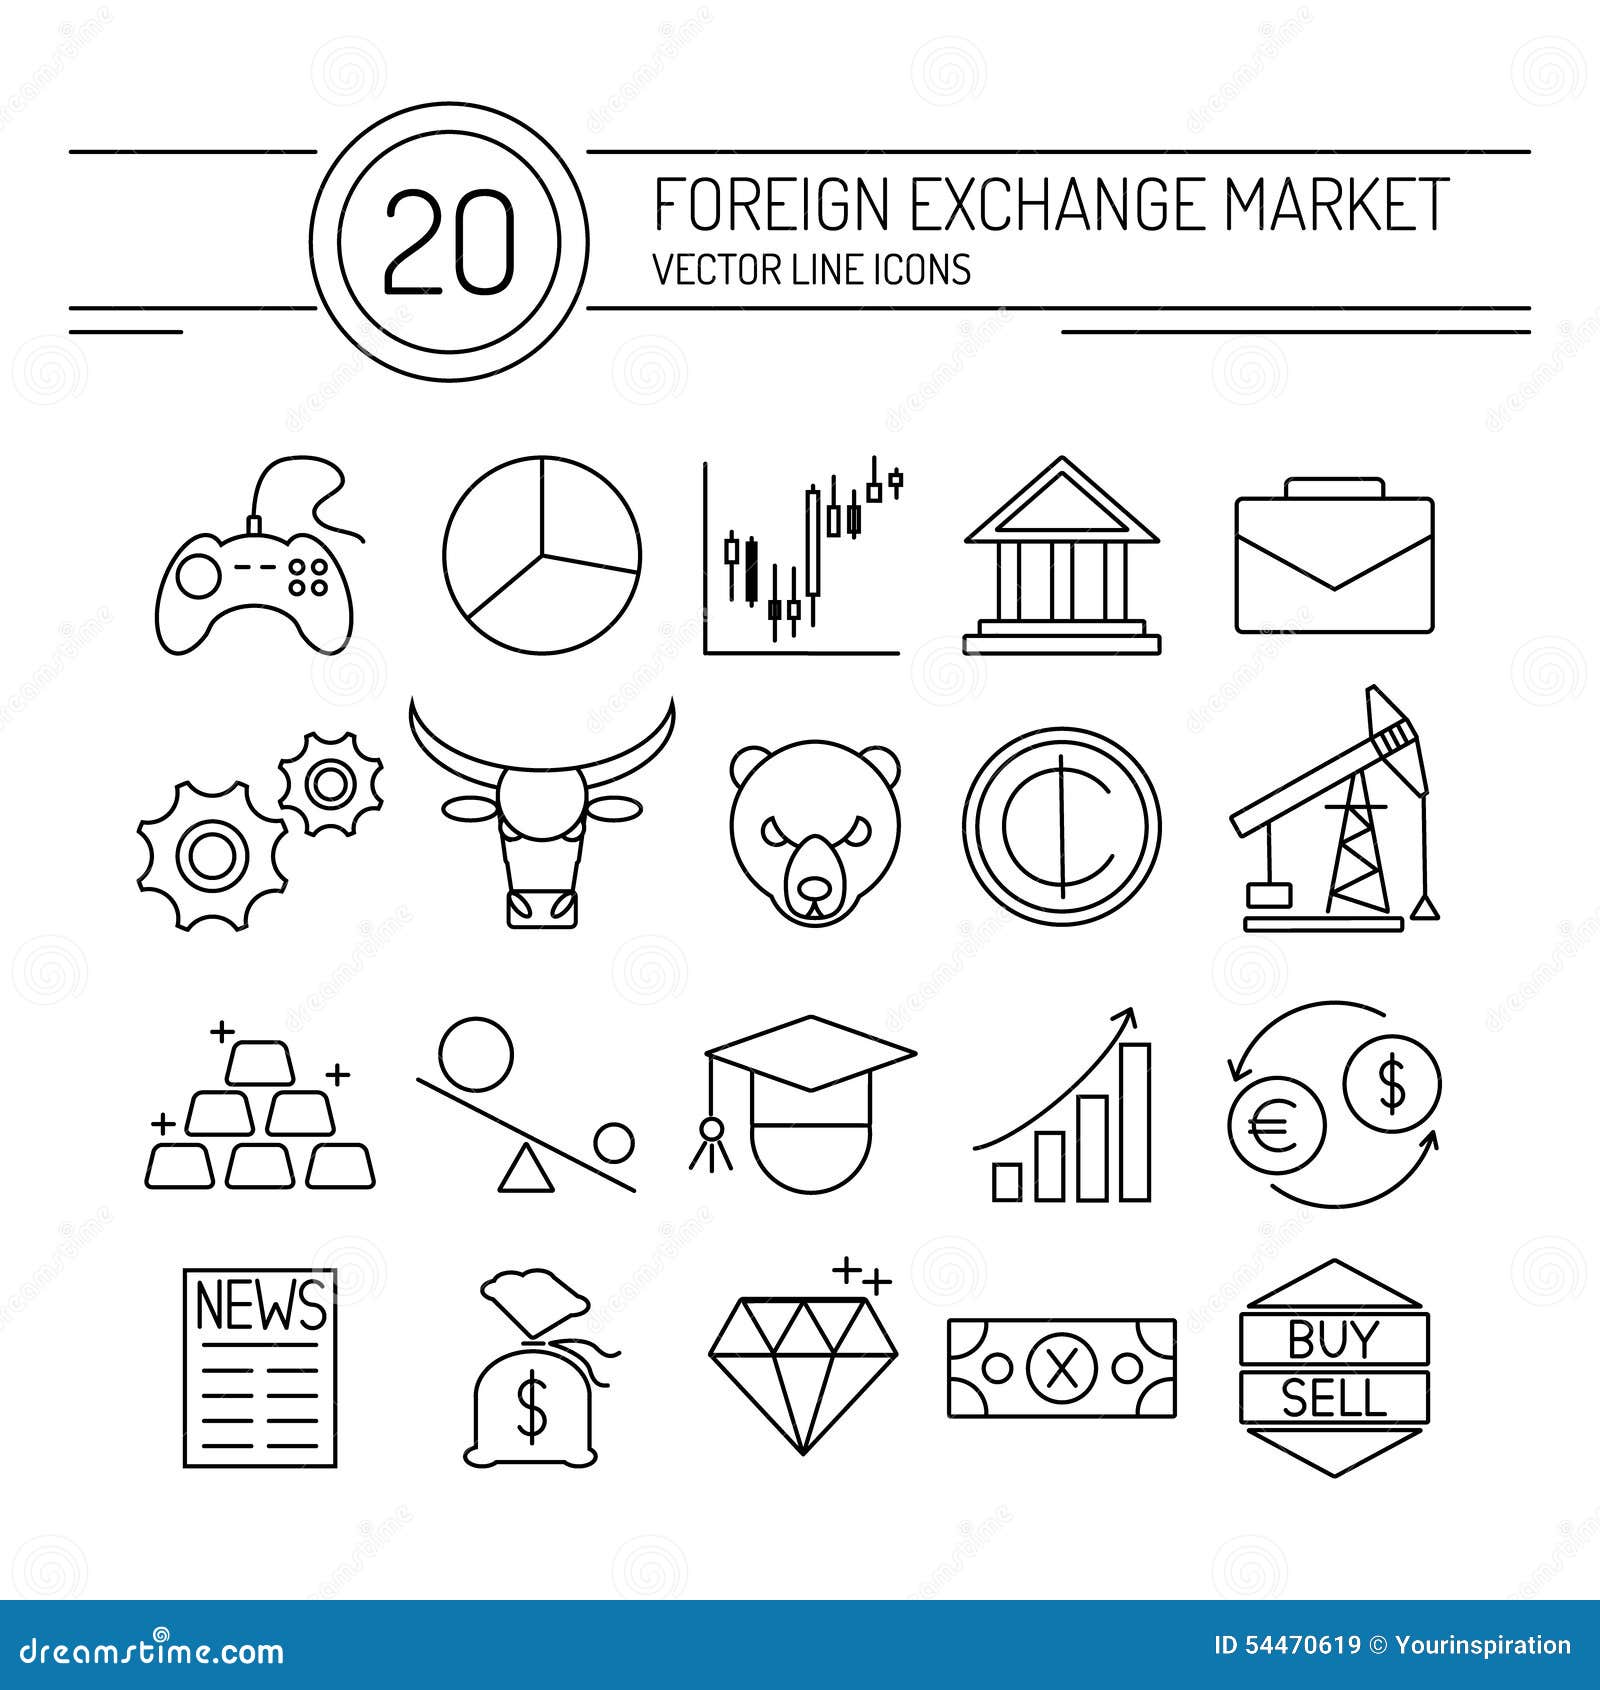 icons for the forex website